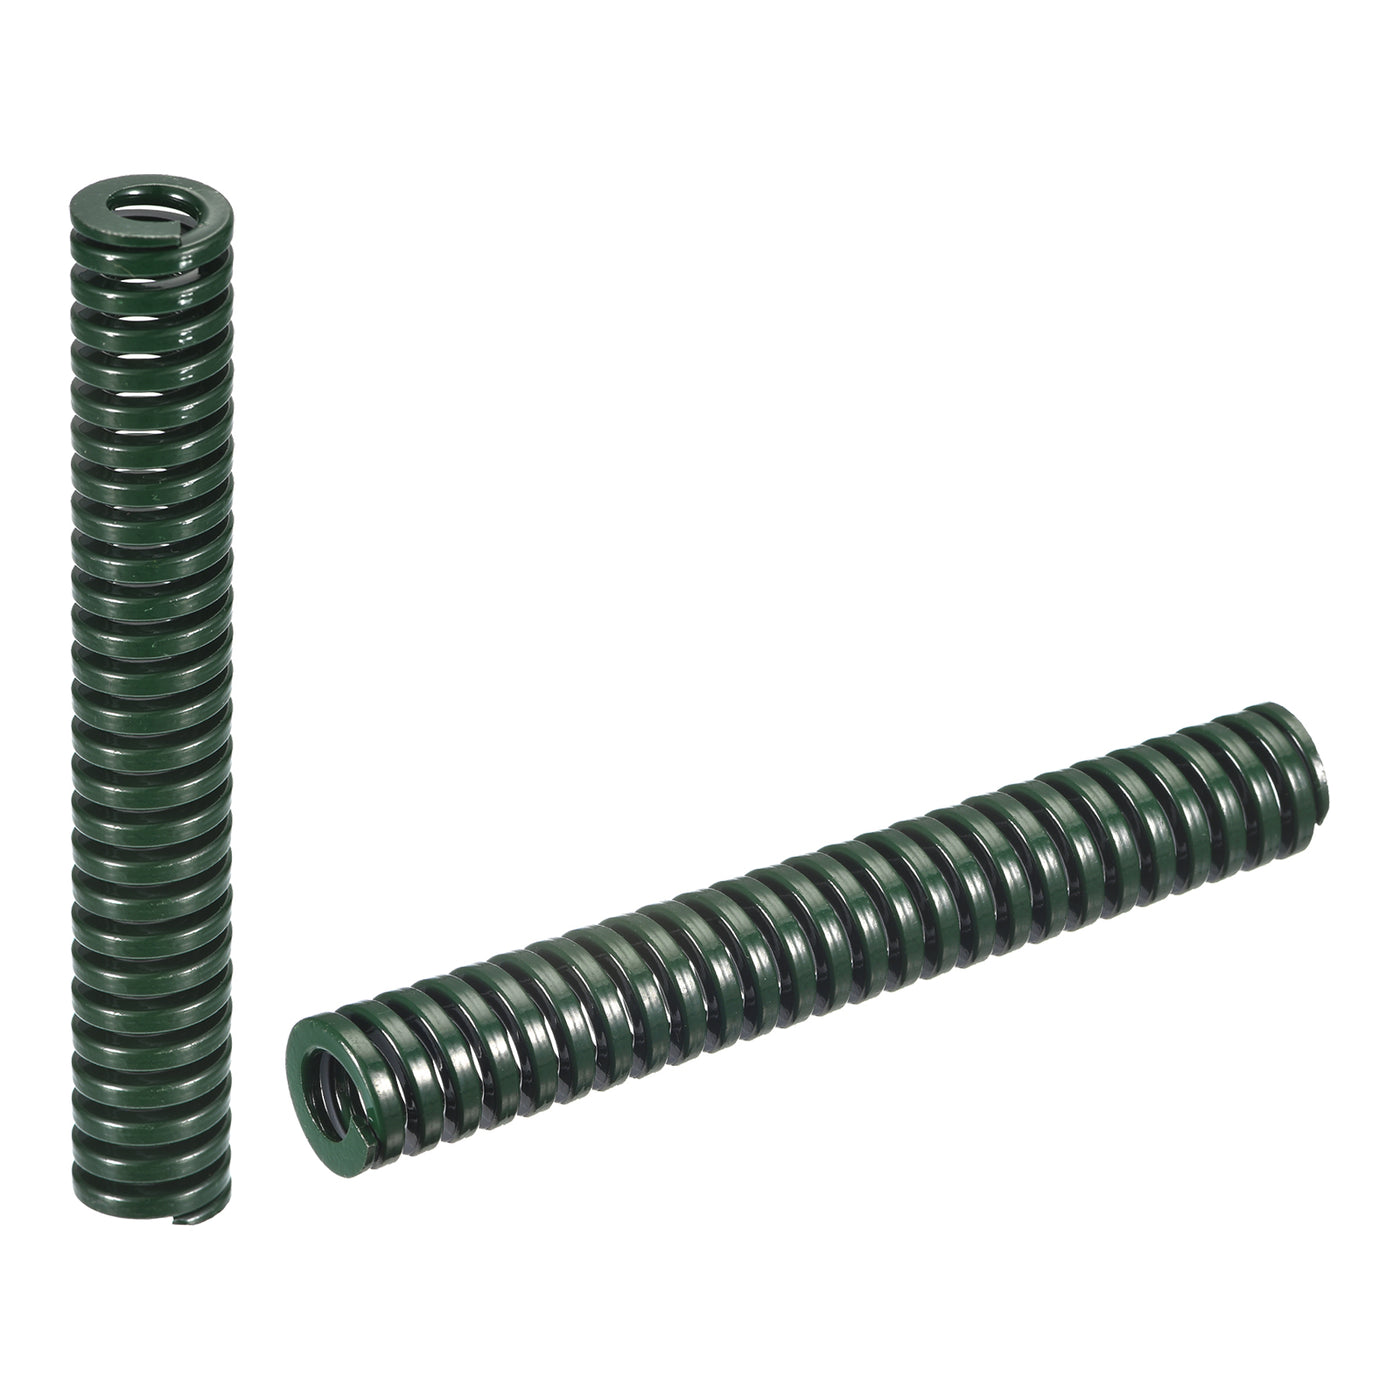 uxcell Uxcell 3D Printer Die Spring, 2pcs 14mm OD 100mm Long Spiral Stamping Compression Green